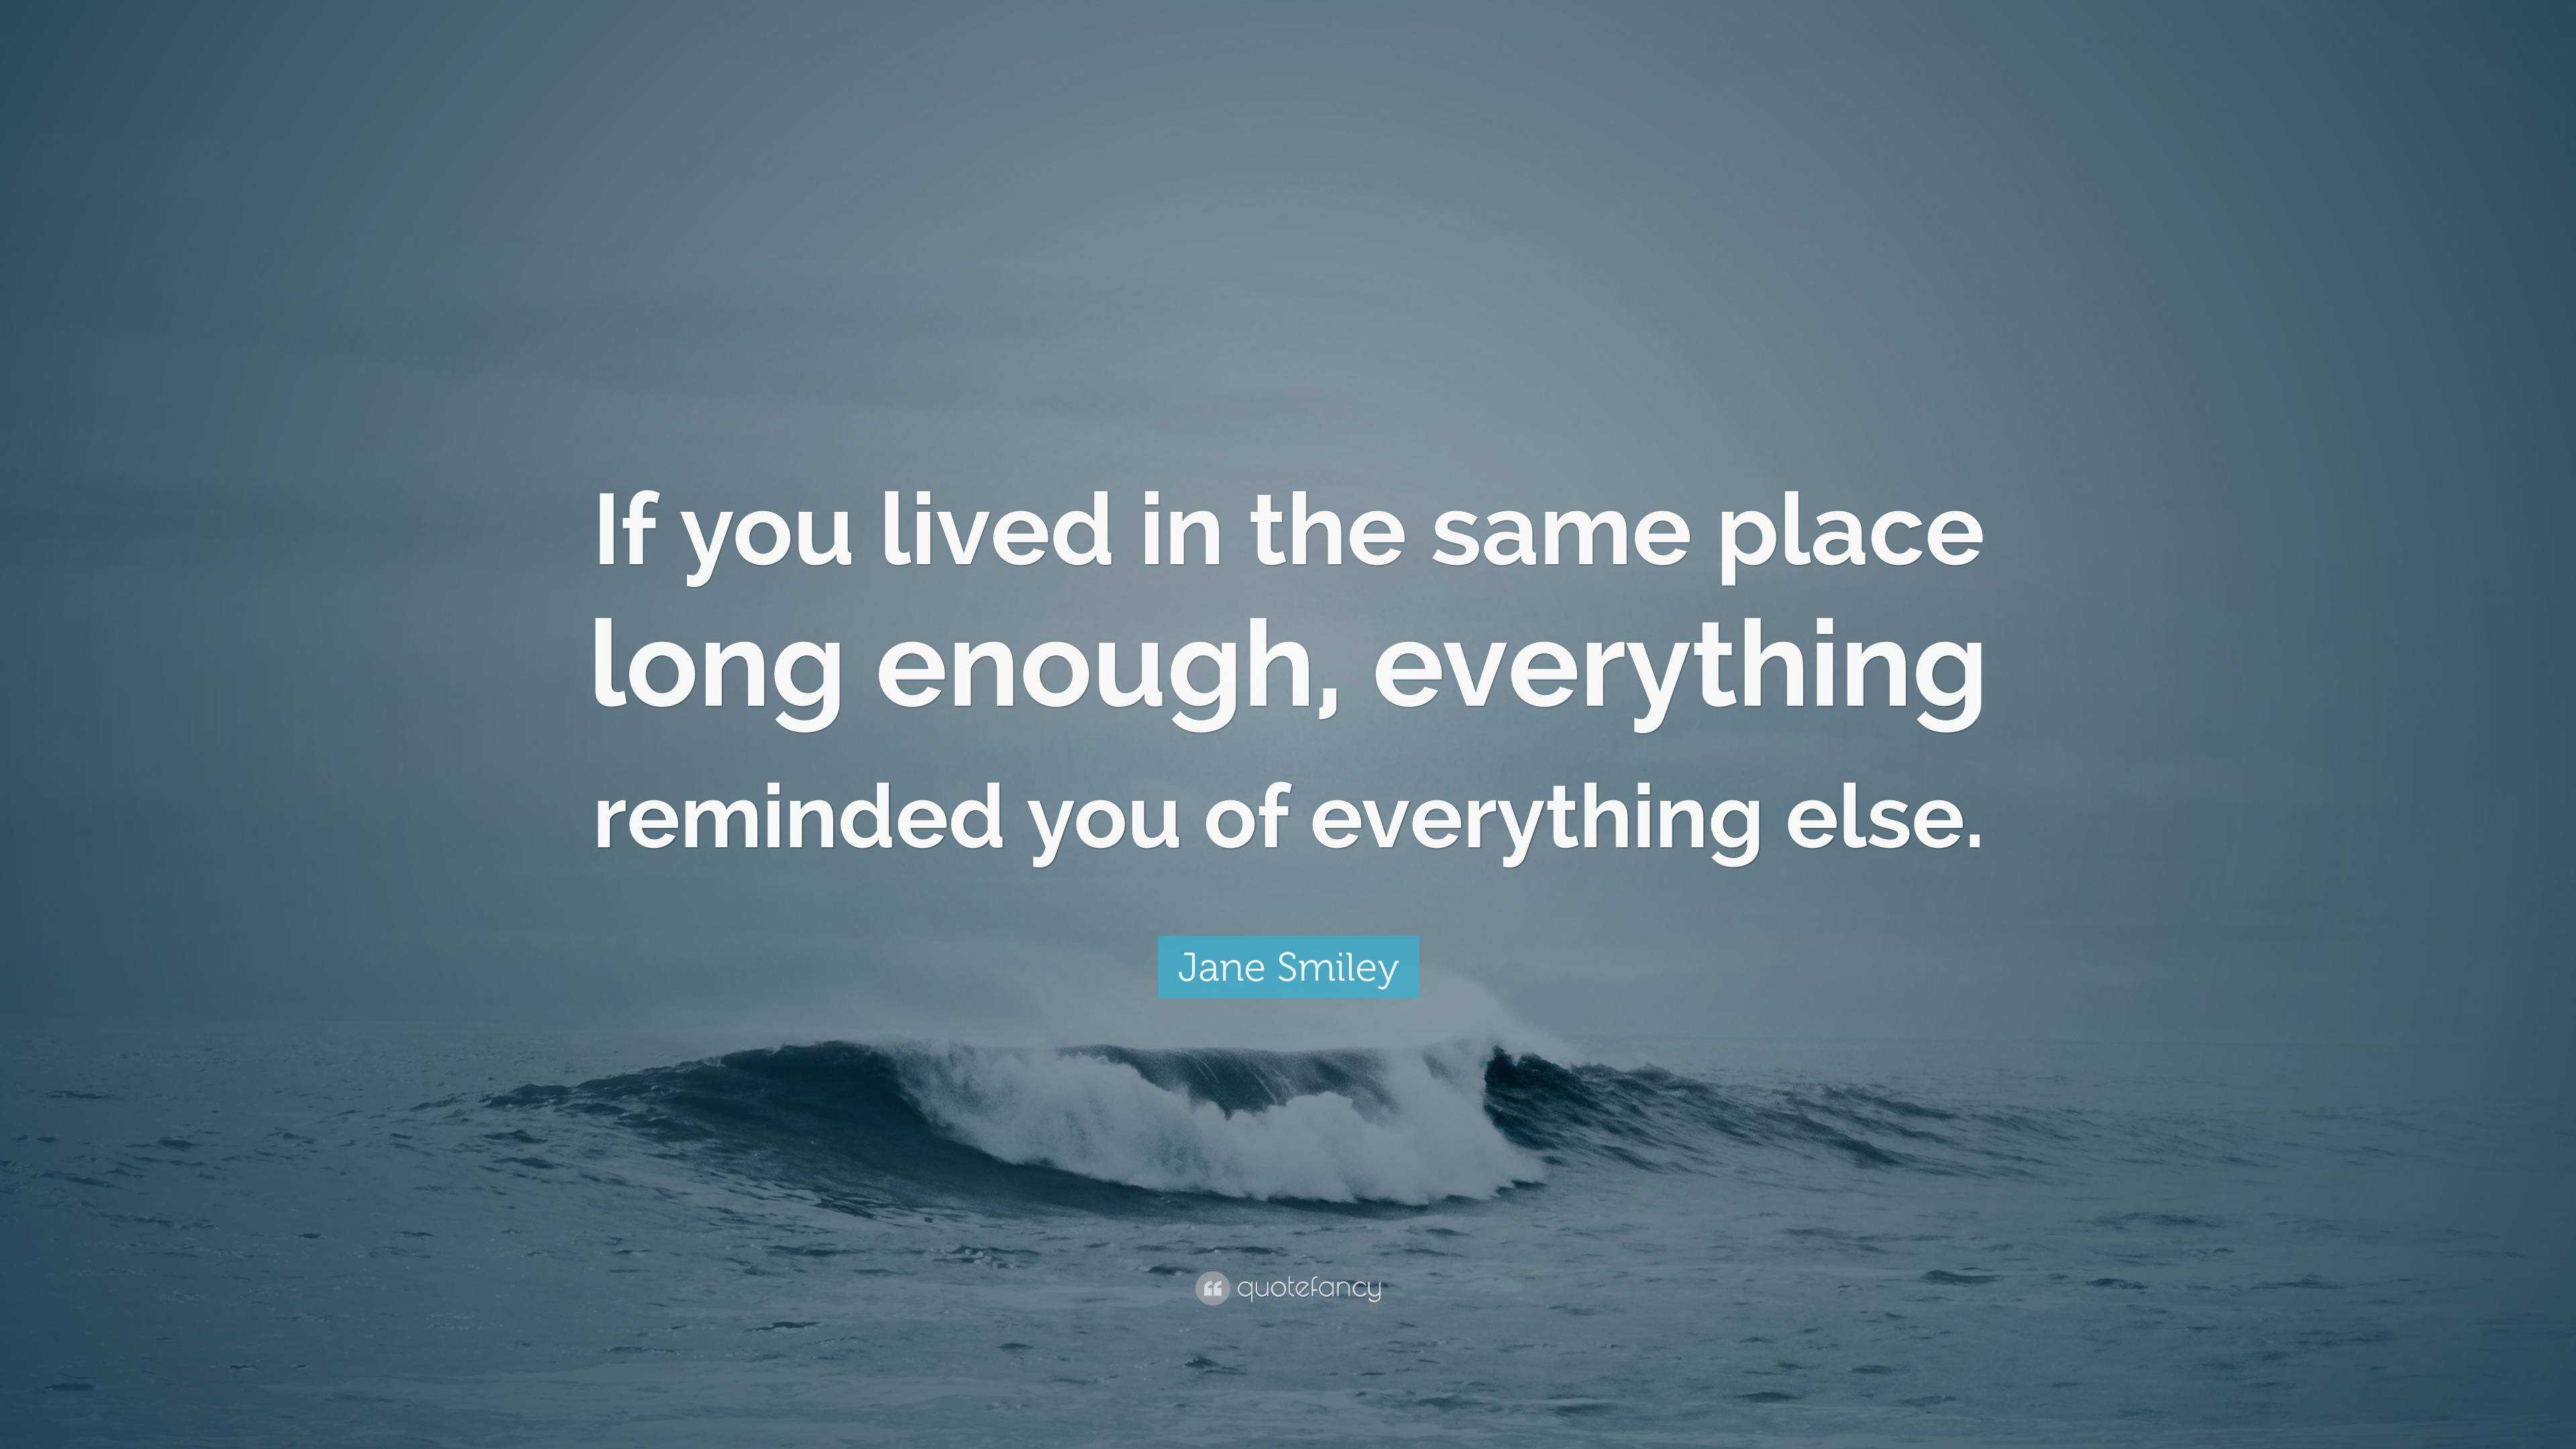 Jane Smiley Quote: “If you lived in the same place long enough ...